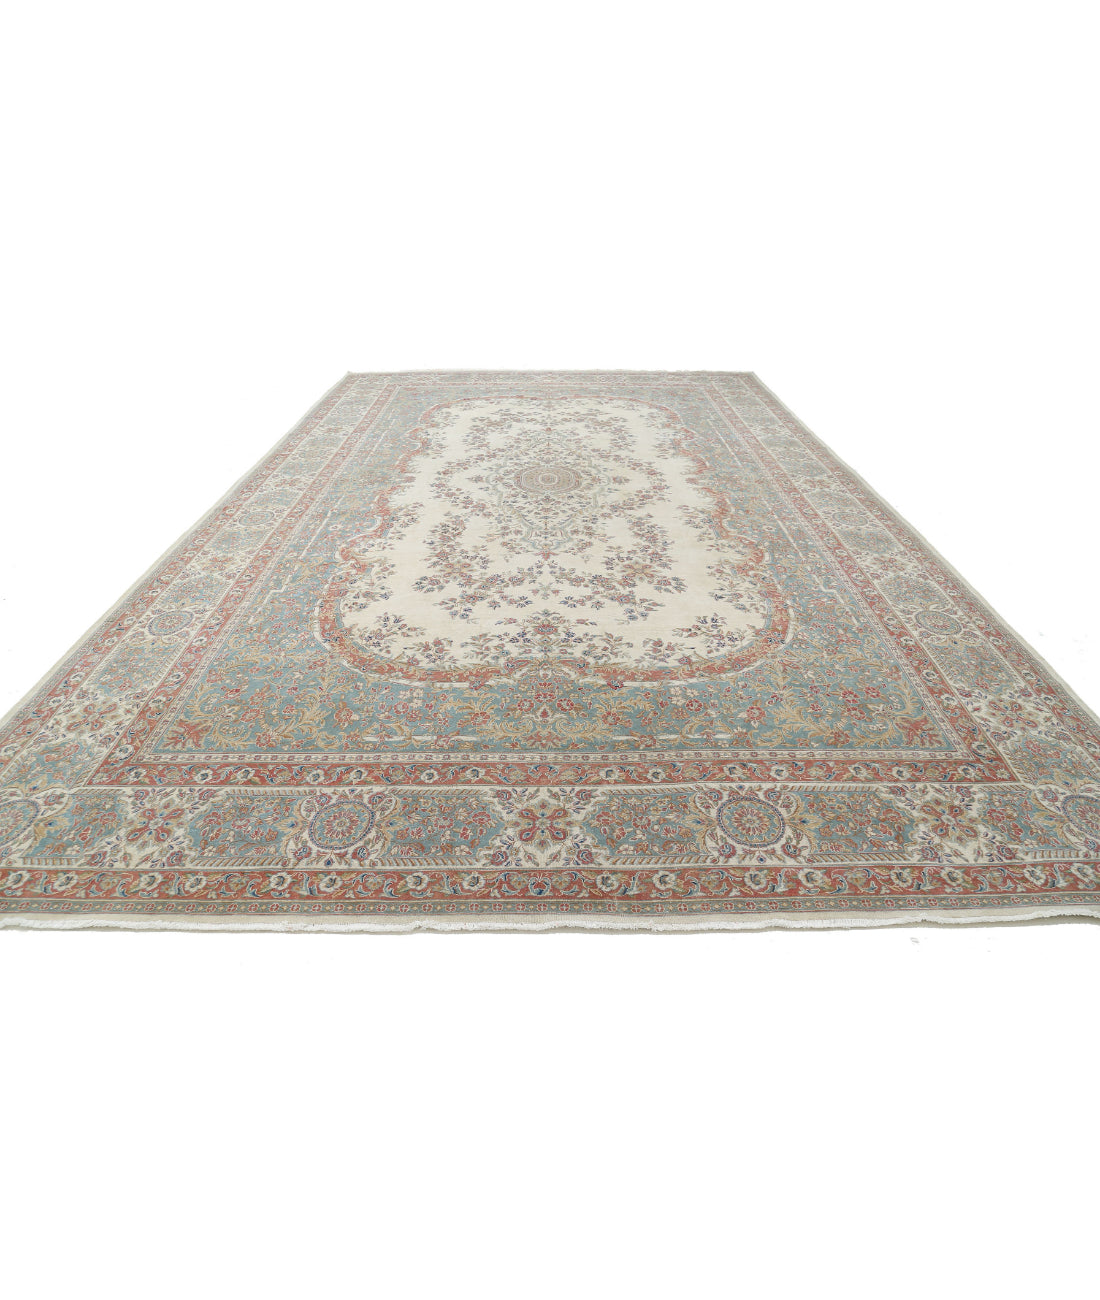 Hand Knotted Vintage Persian Kerman Wool Rug - 11'8'' x 19'3'' 11'8'' x 19'3'' (350 X 578) / Ivory / Blue